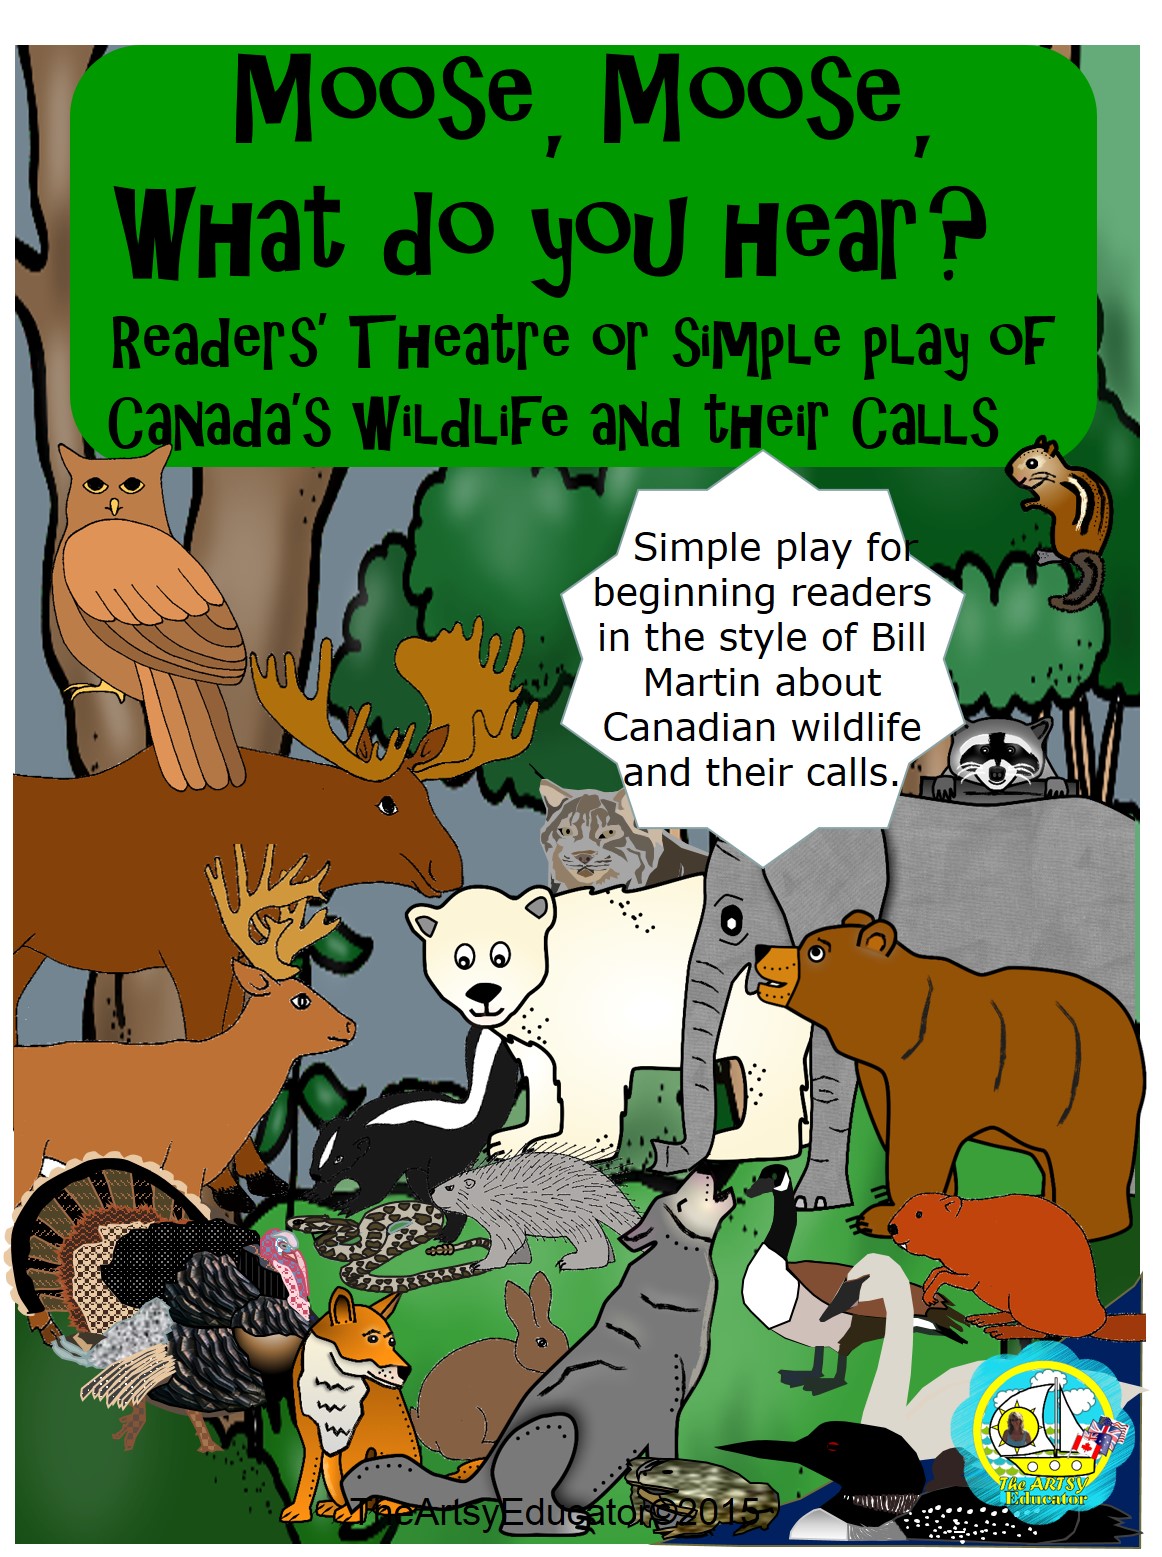 MOOSE, MOOSE, WHAT DO YOU HEAR?...Readers’ Theatre or Simple play about Canada’s Wildlife and Their Sounds